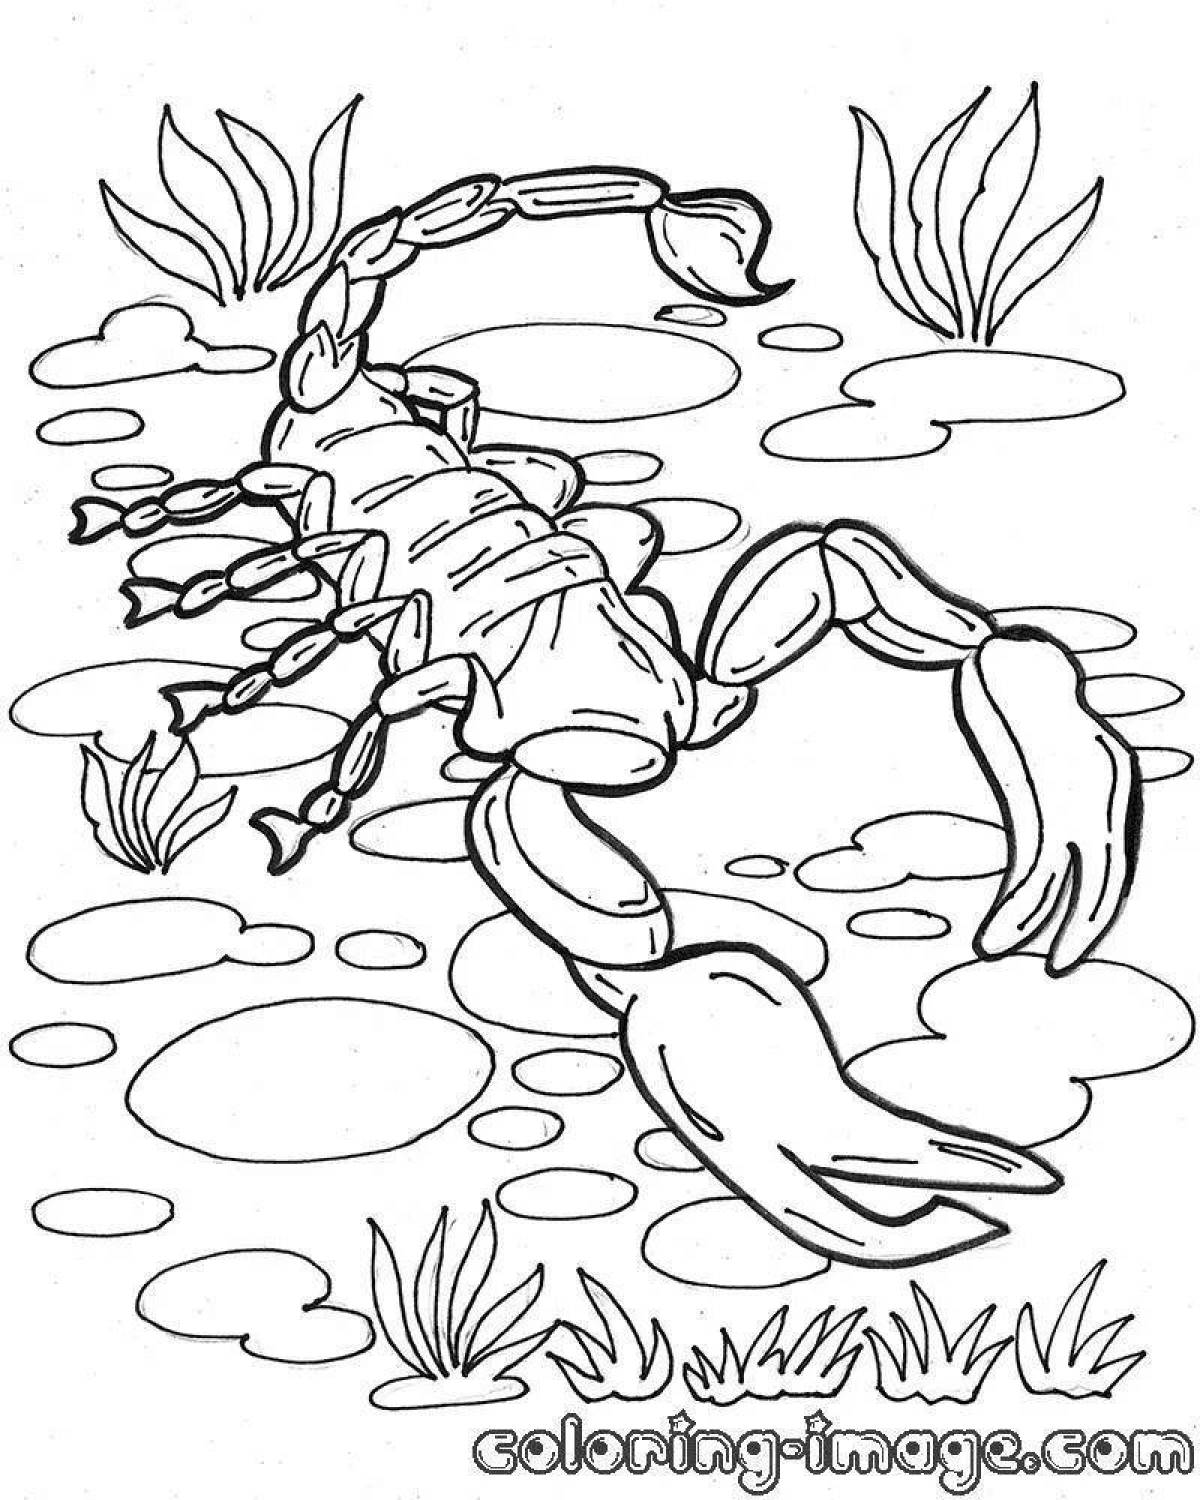 Coloring page happy scorpion